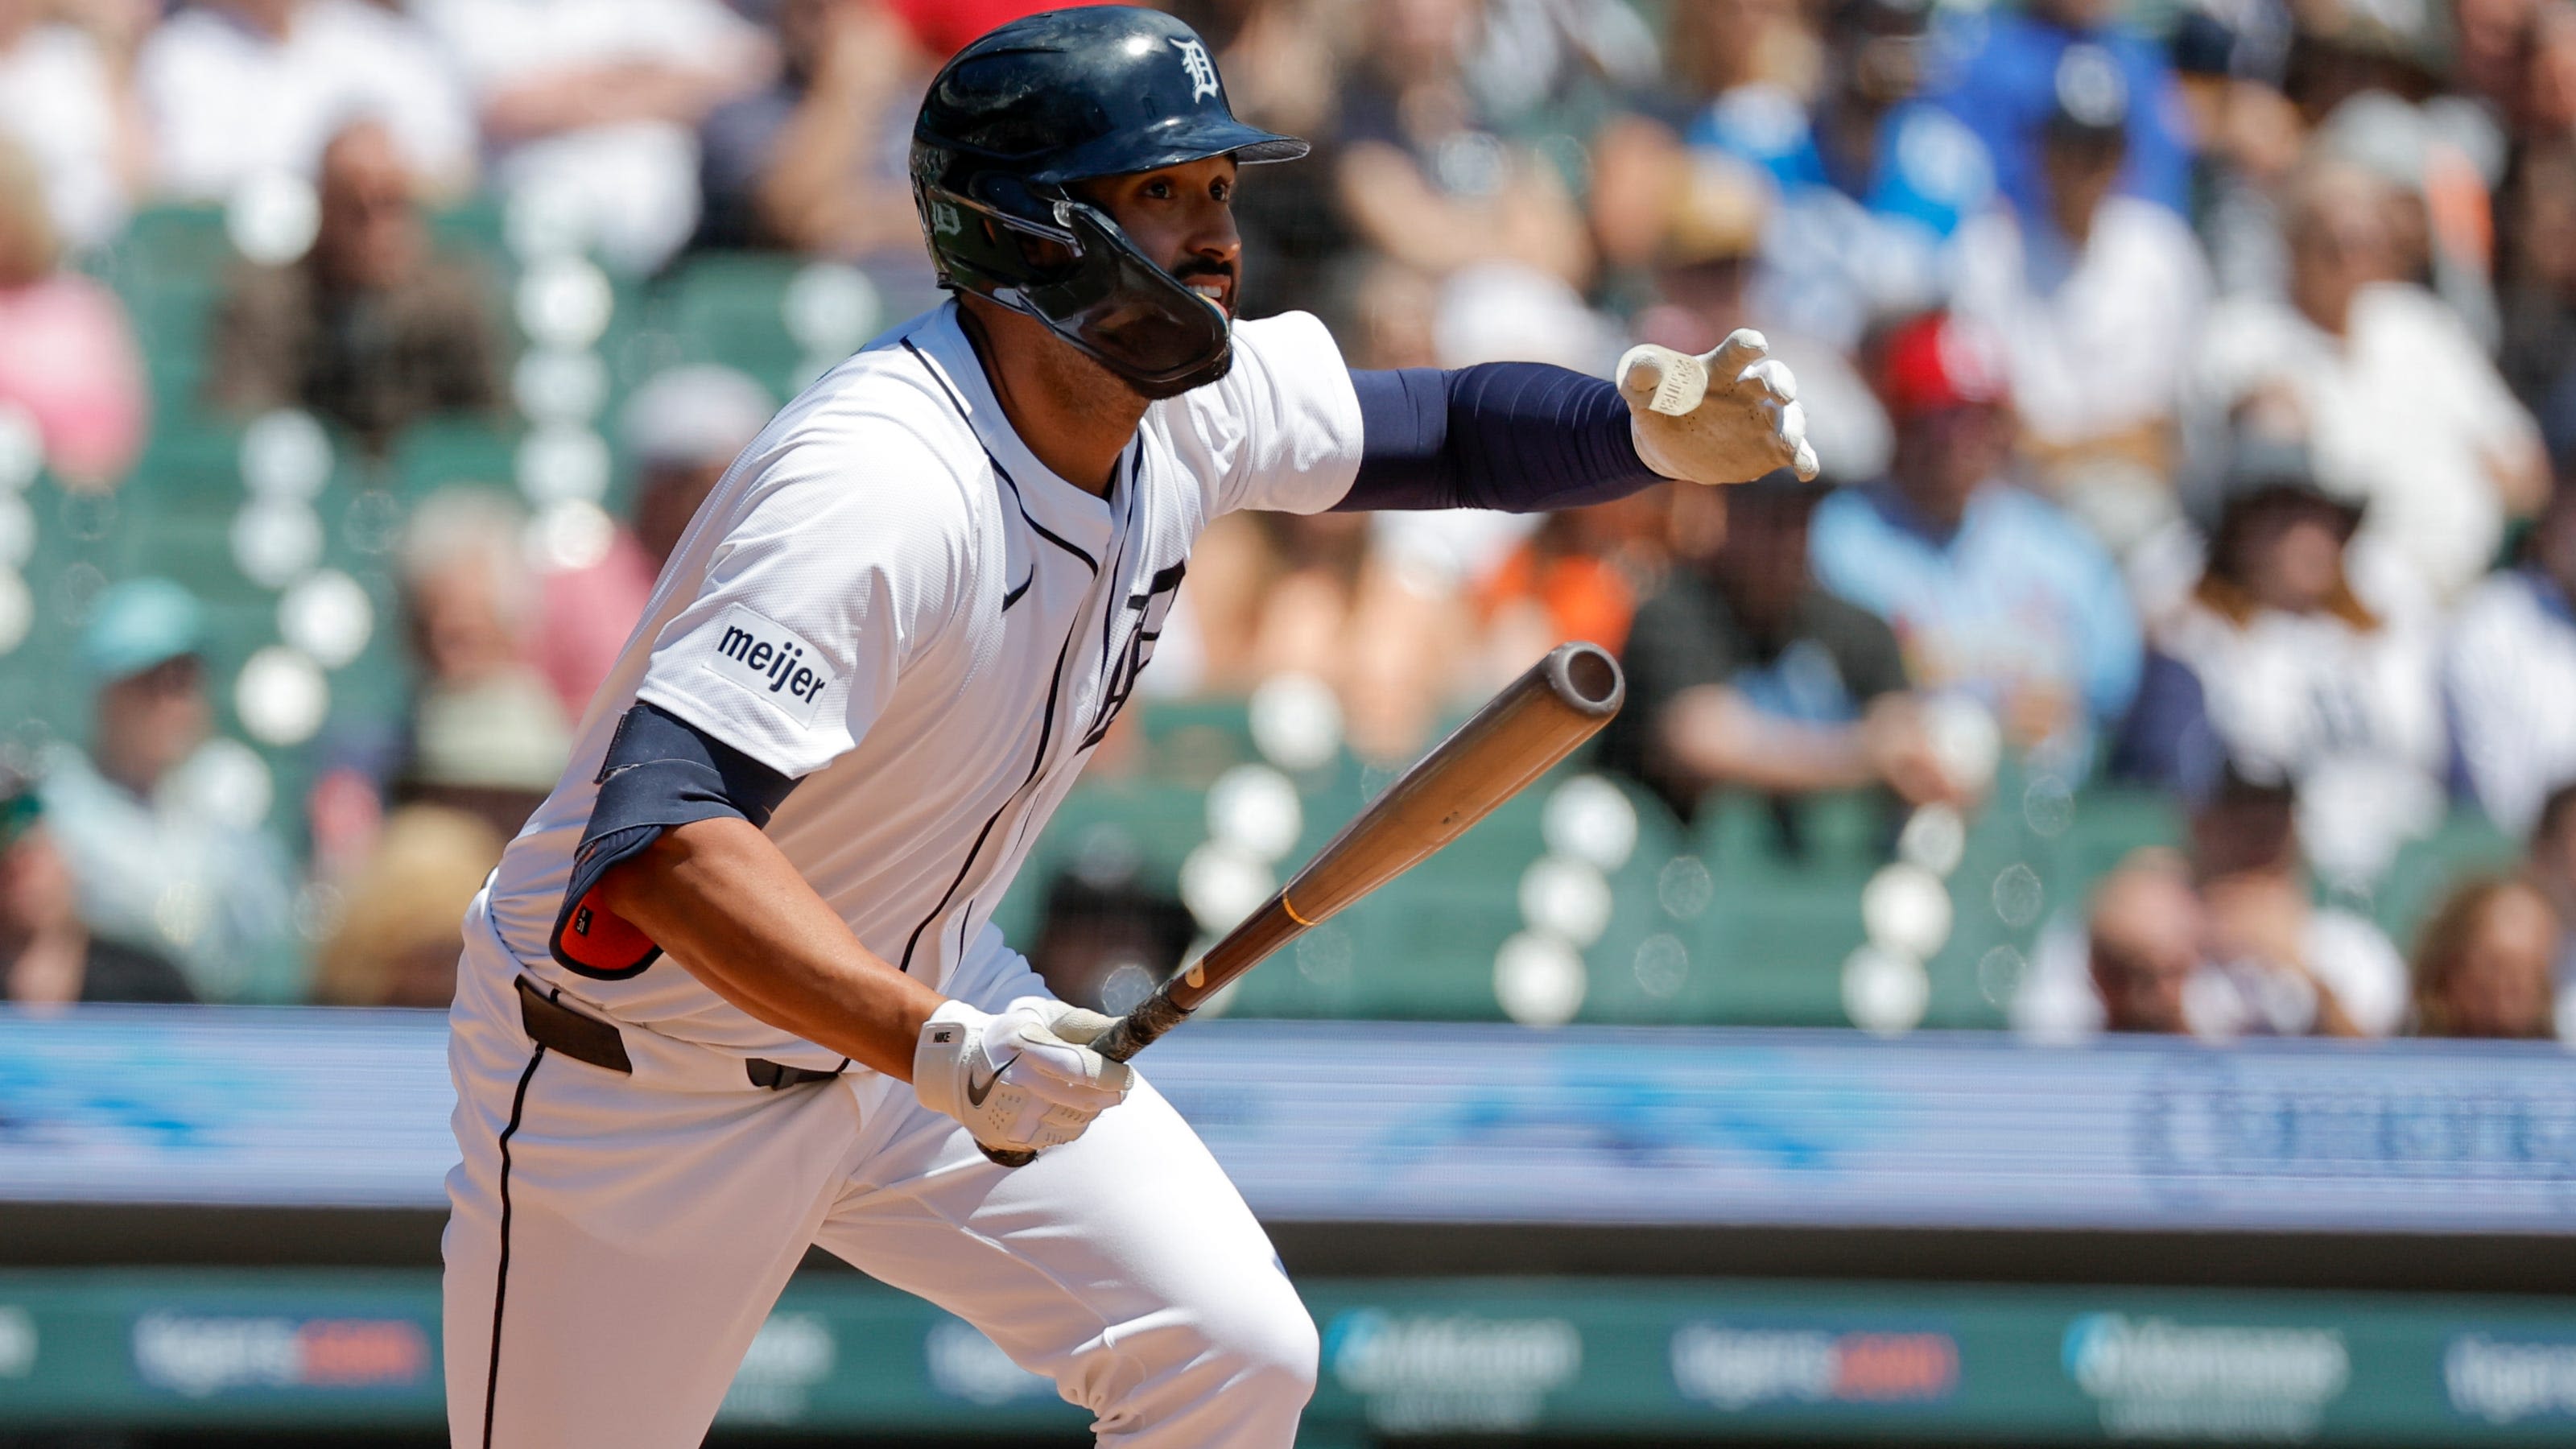 Despite a non-disastrous start, it's way too early to talk playoffs for Detroit Tigers?